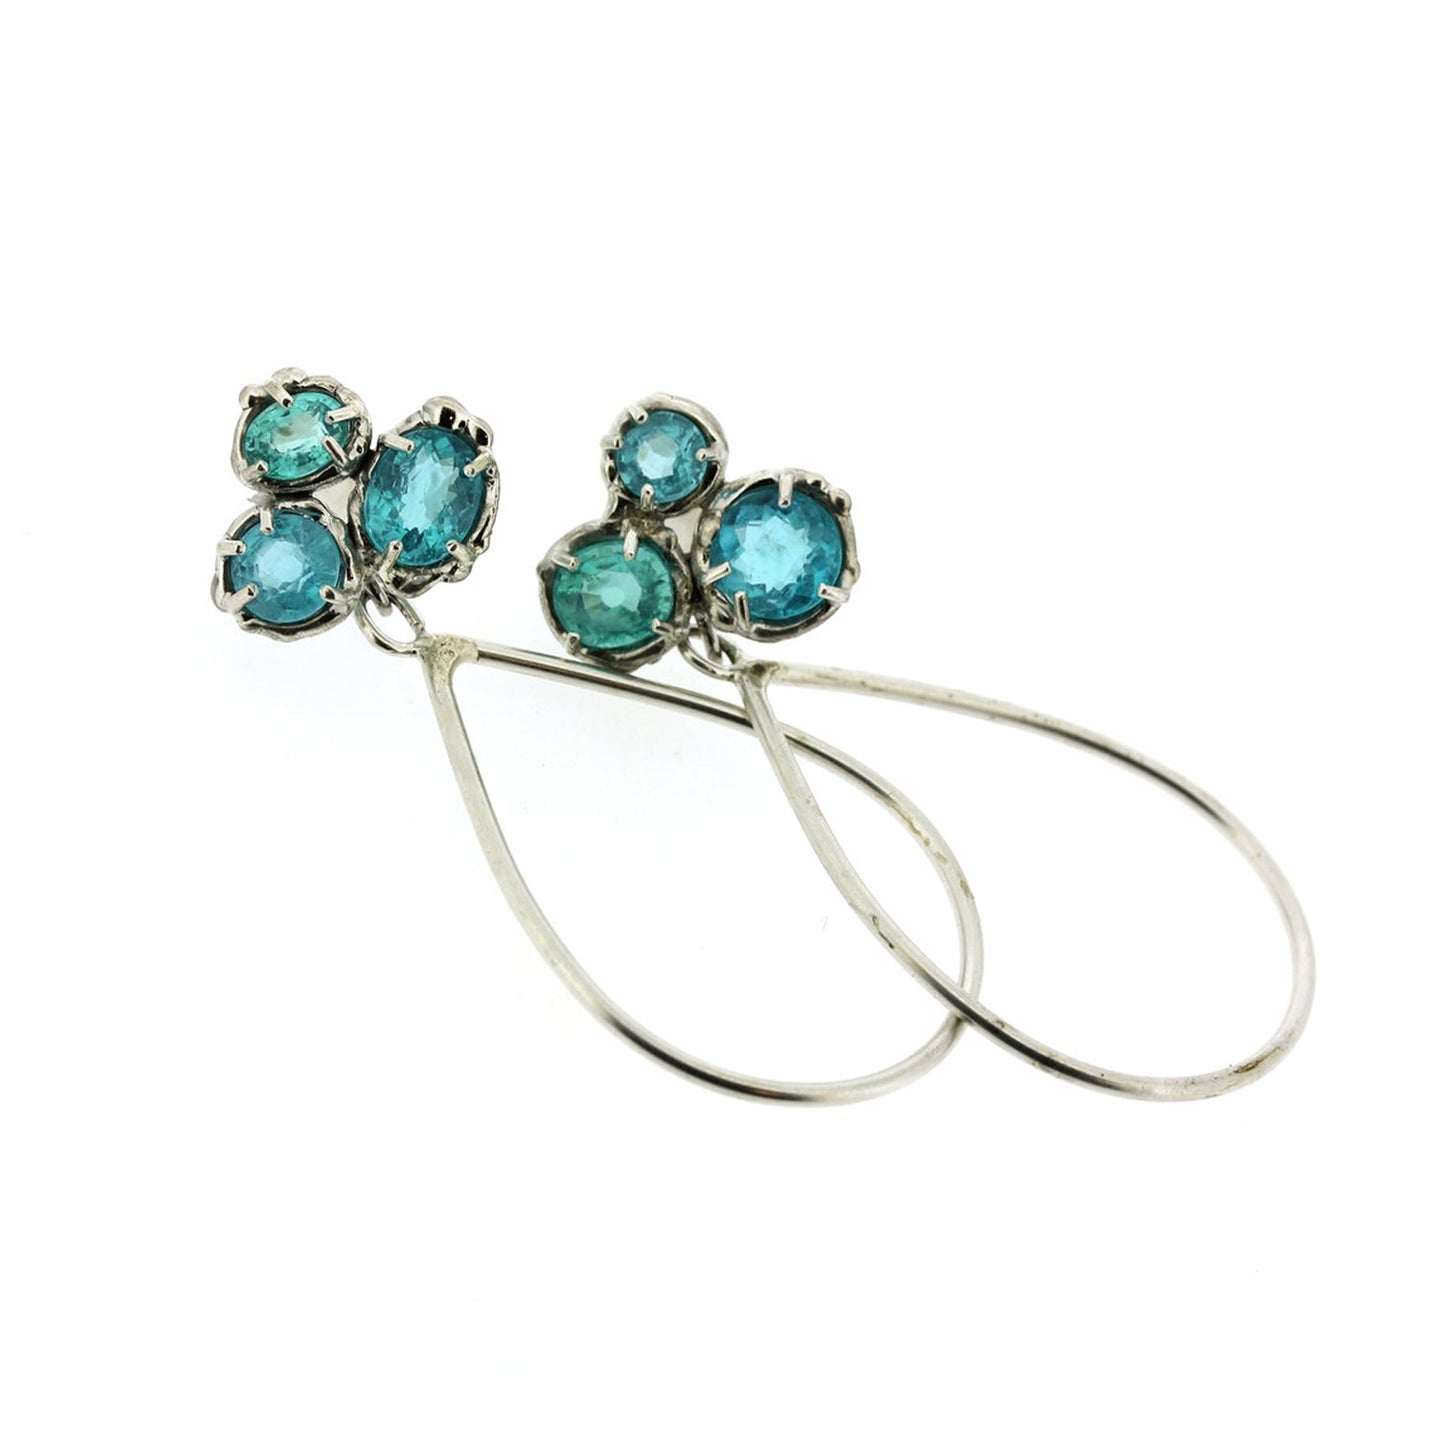 Full view of Elsa Earrings. These earrings showcase a cluster of Apatite as its stud and dangling from that is a teardrop made of silver wire.